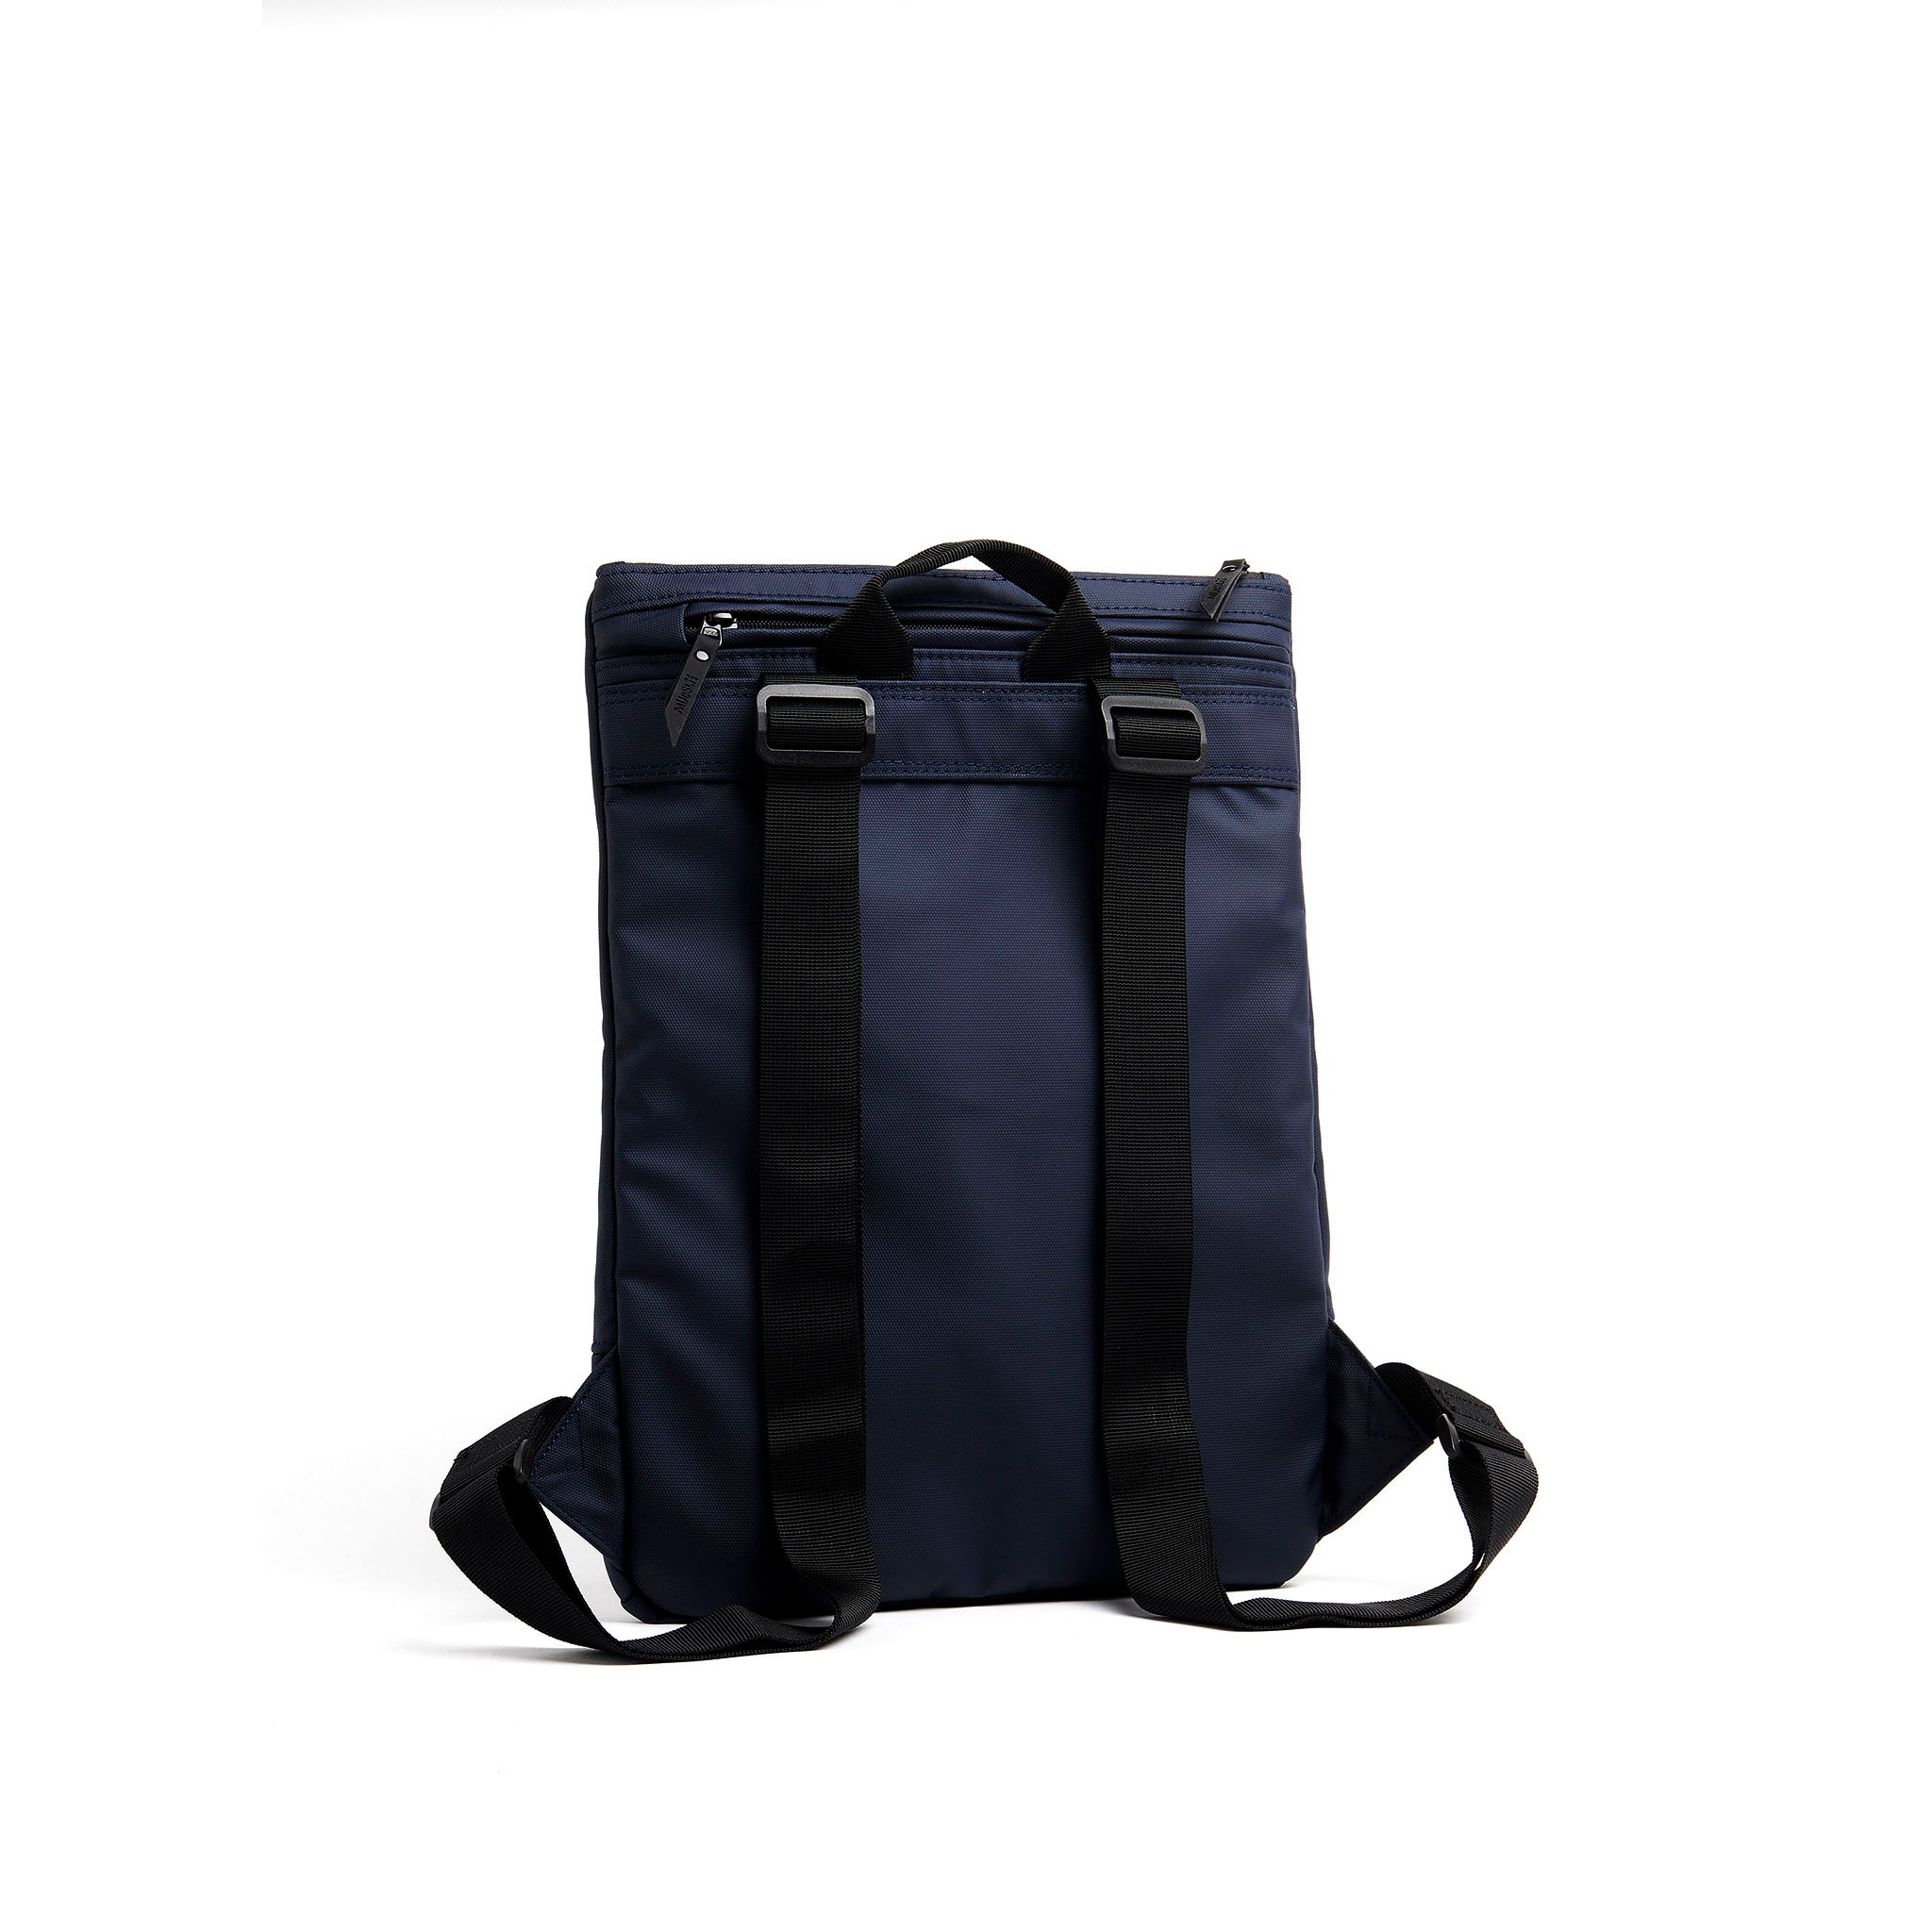 Mueslii light backpack,  made of PU coated waterproof nylon, with a laptop compartment, color blue, back view.